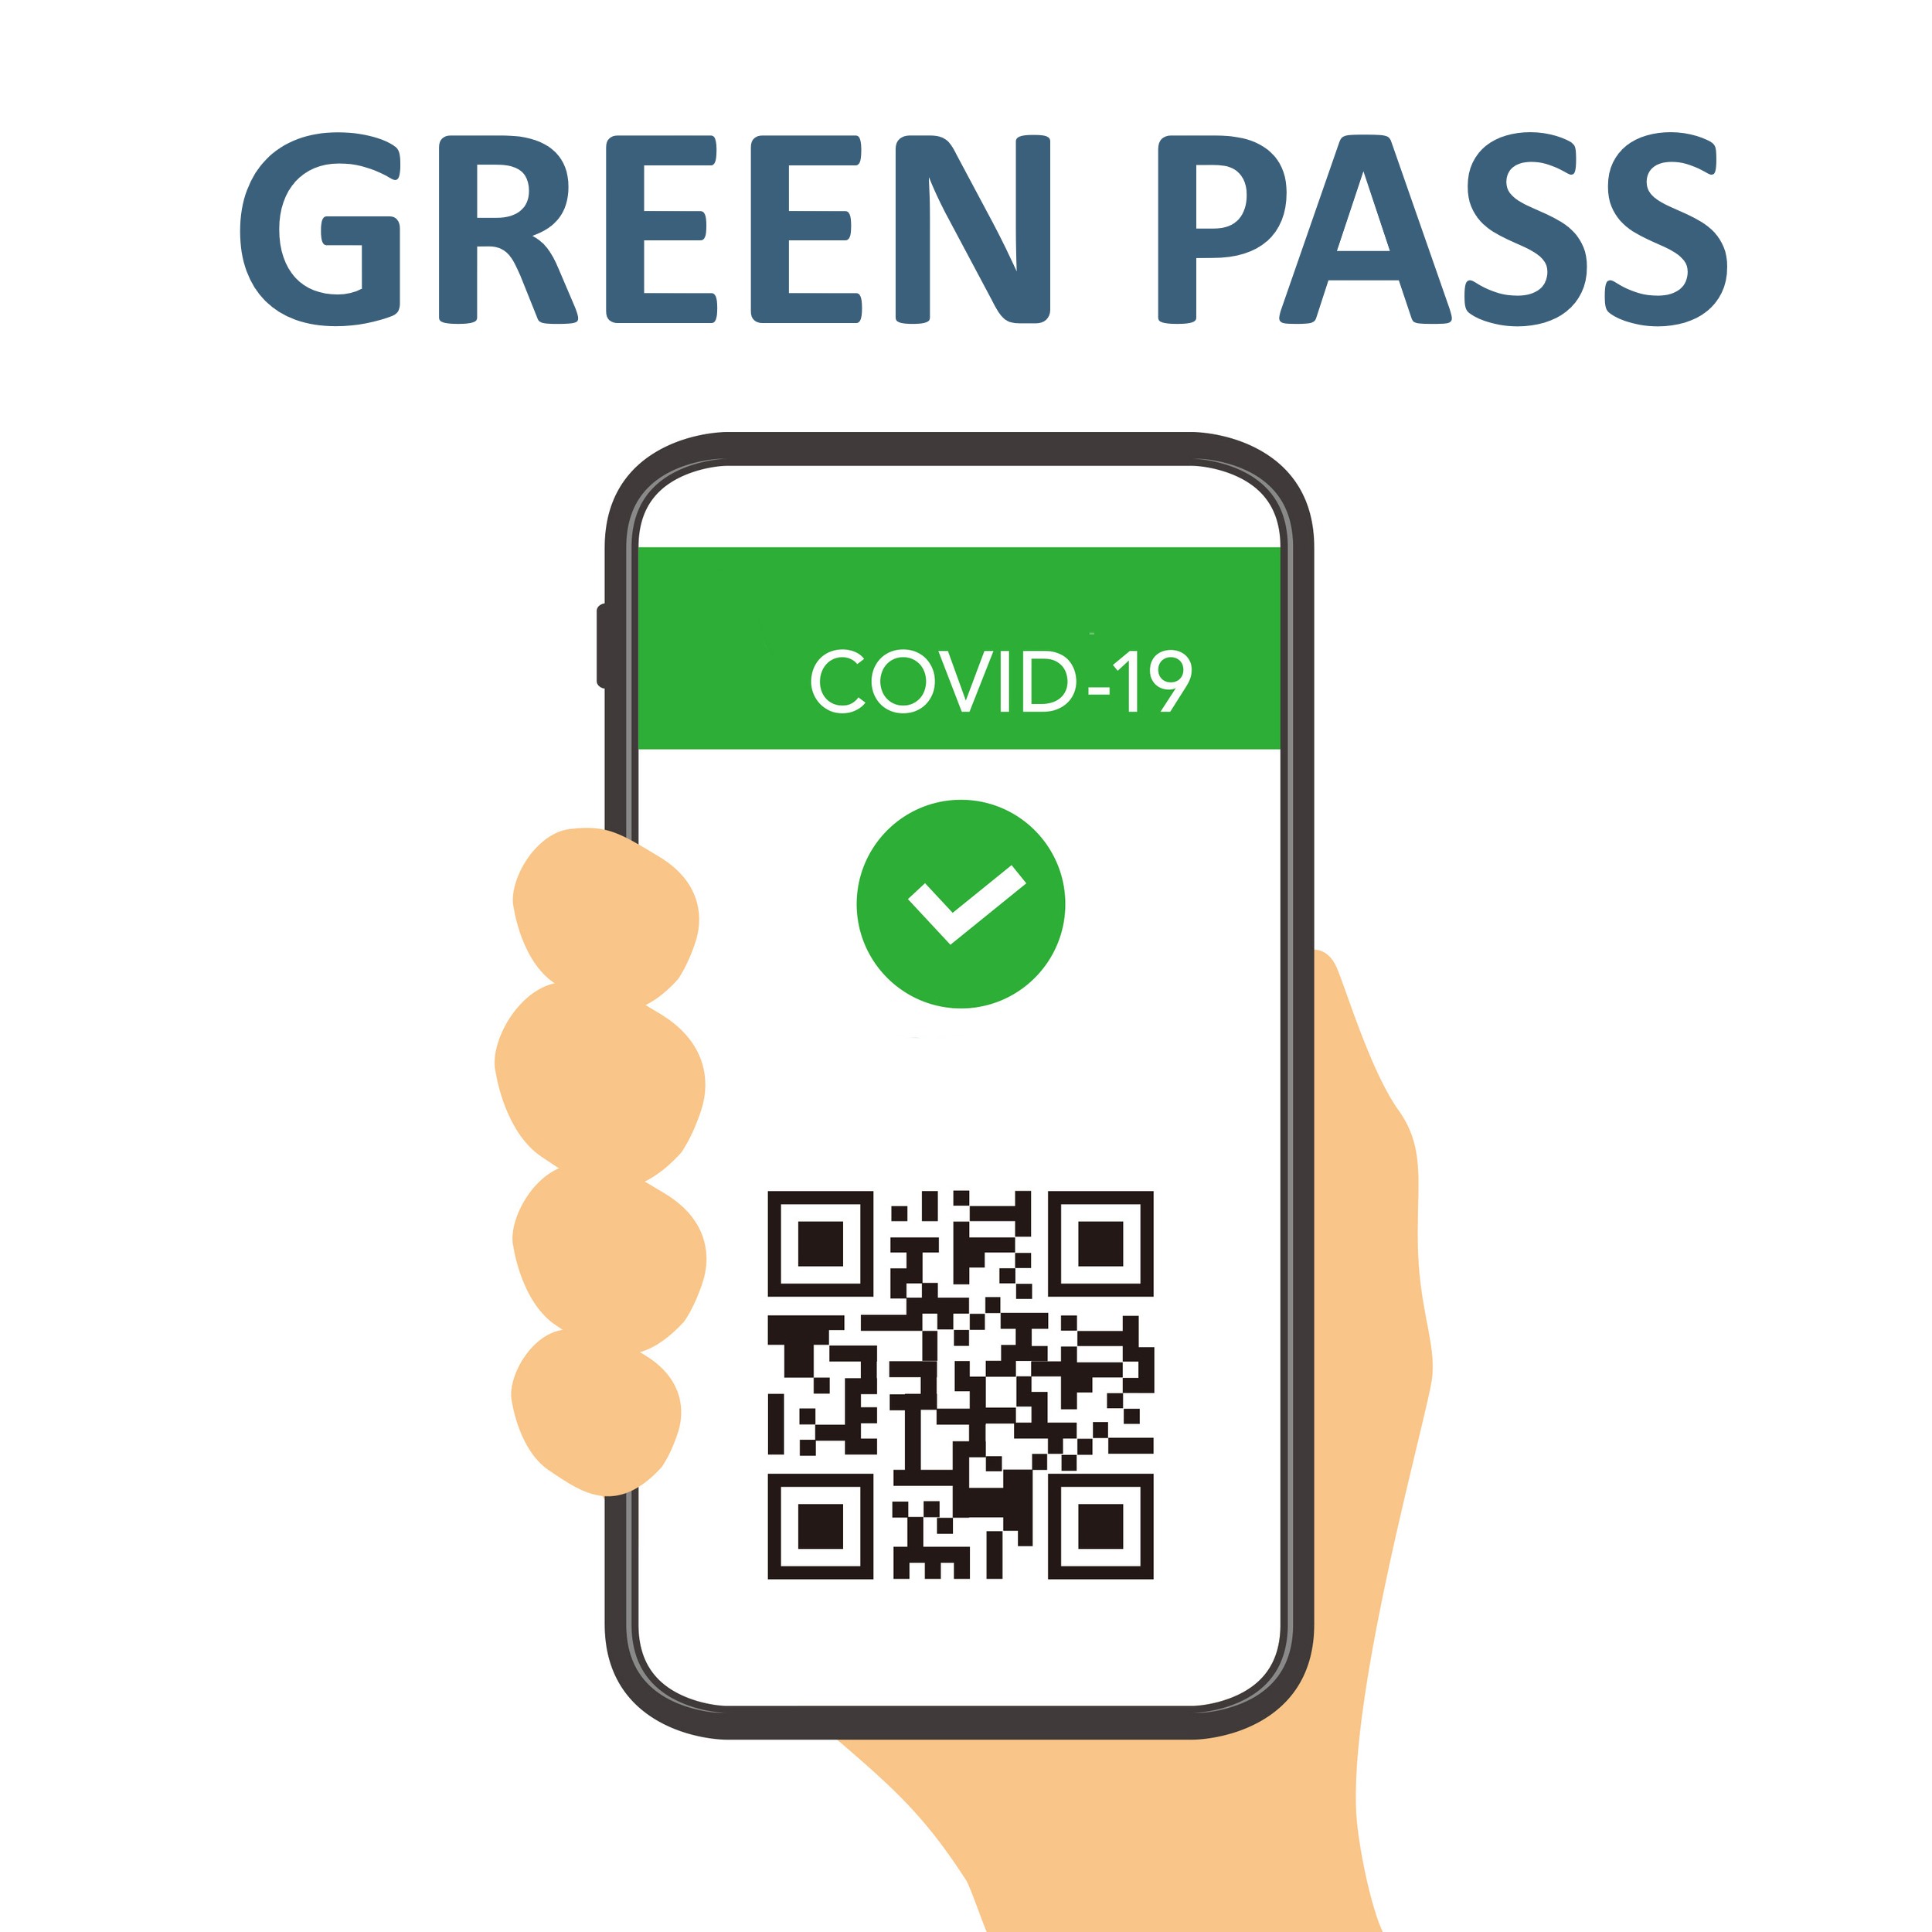 INGRESSO MUSEO CON GREEN PASS